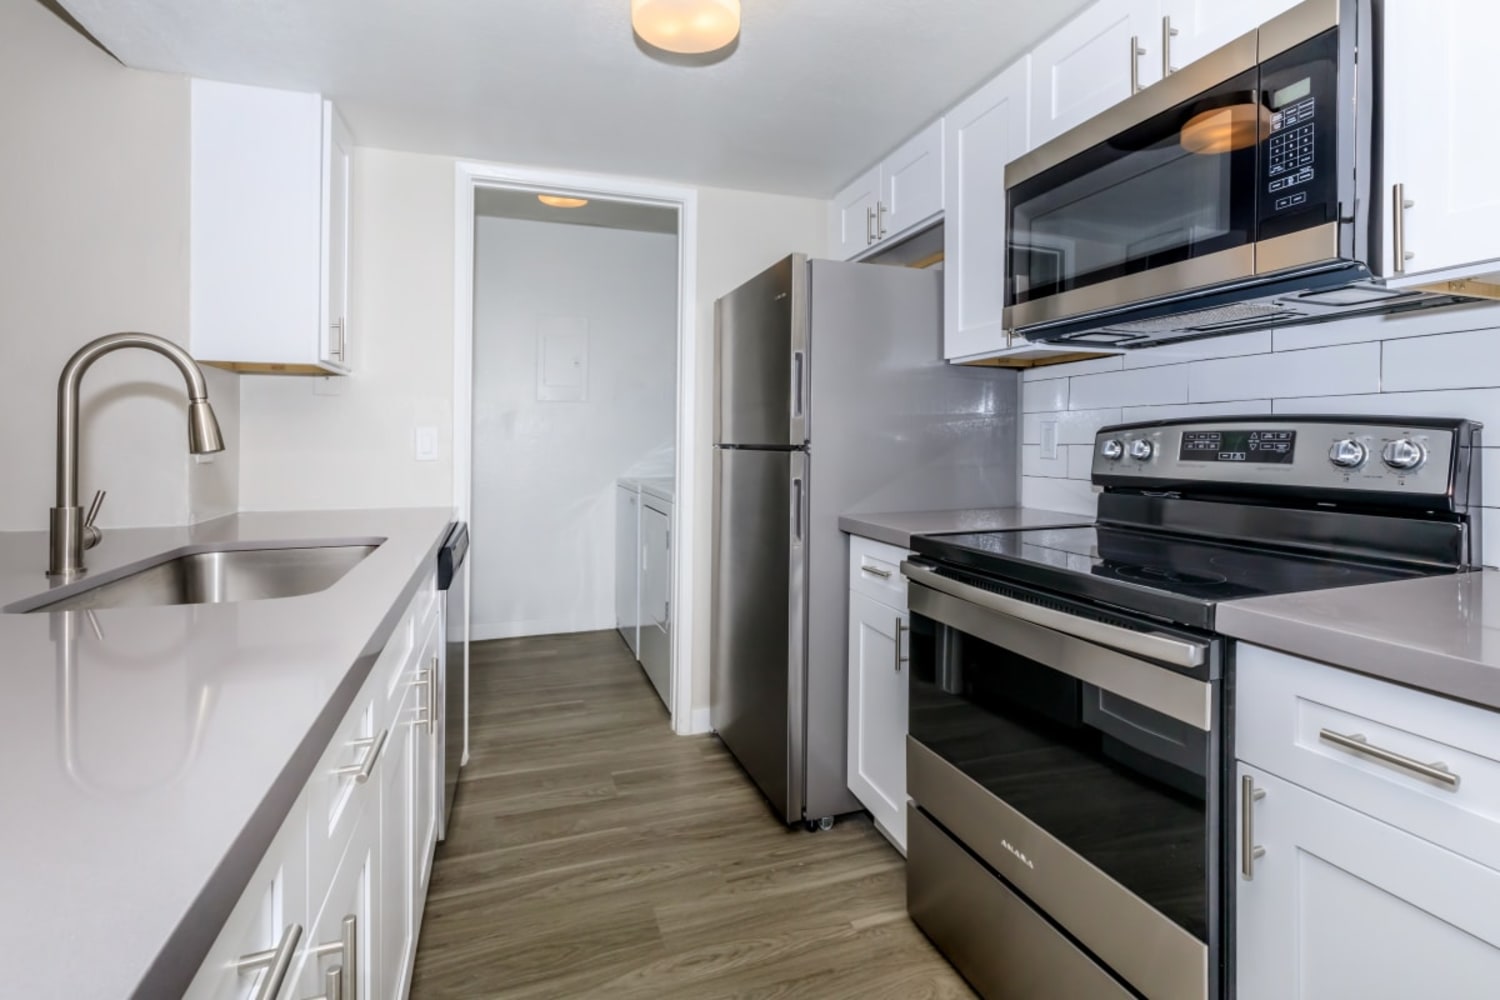 A bright kitchen with stainless-steel appliances at Station 21 Apartments in Mesa, Arizona